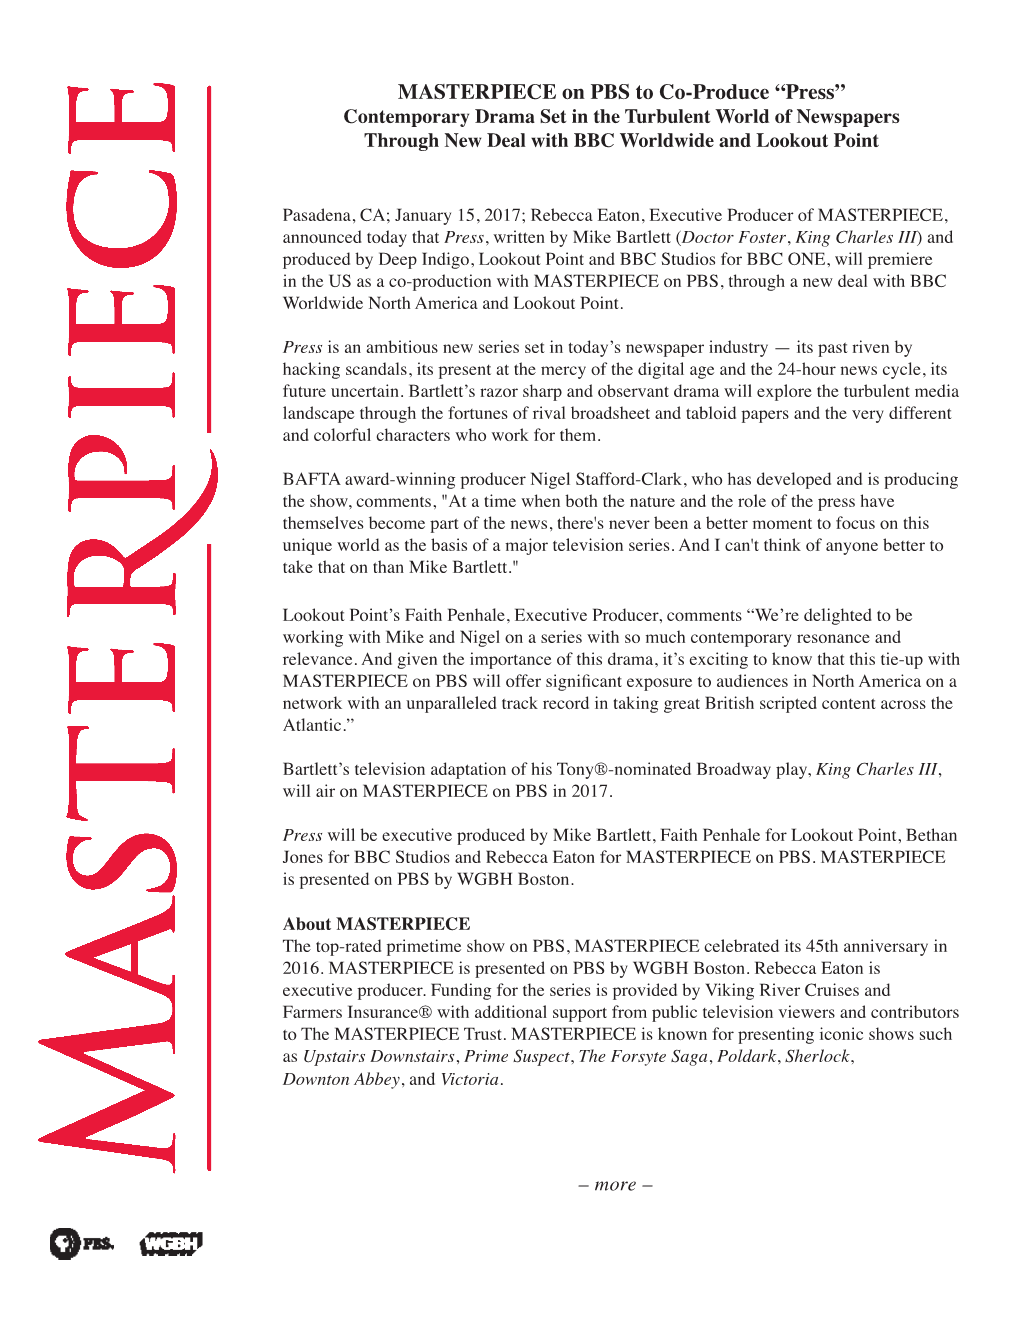 MASTERPIECE on PBS to Co-Produce “Press” Contemporary Drama Set in the Turbulent World of Newspapers Through New Deal with BBC Worldwide and Lookout Point